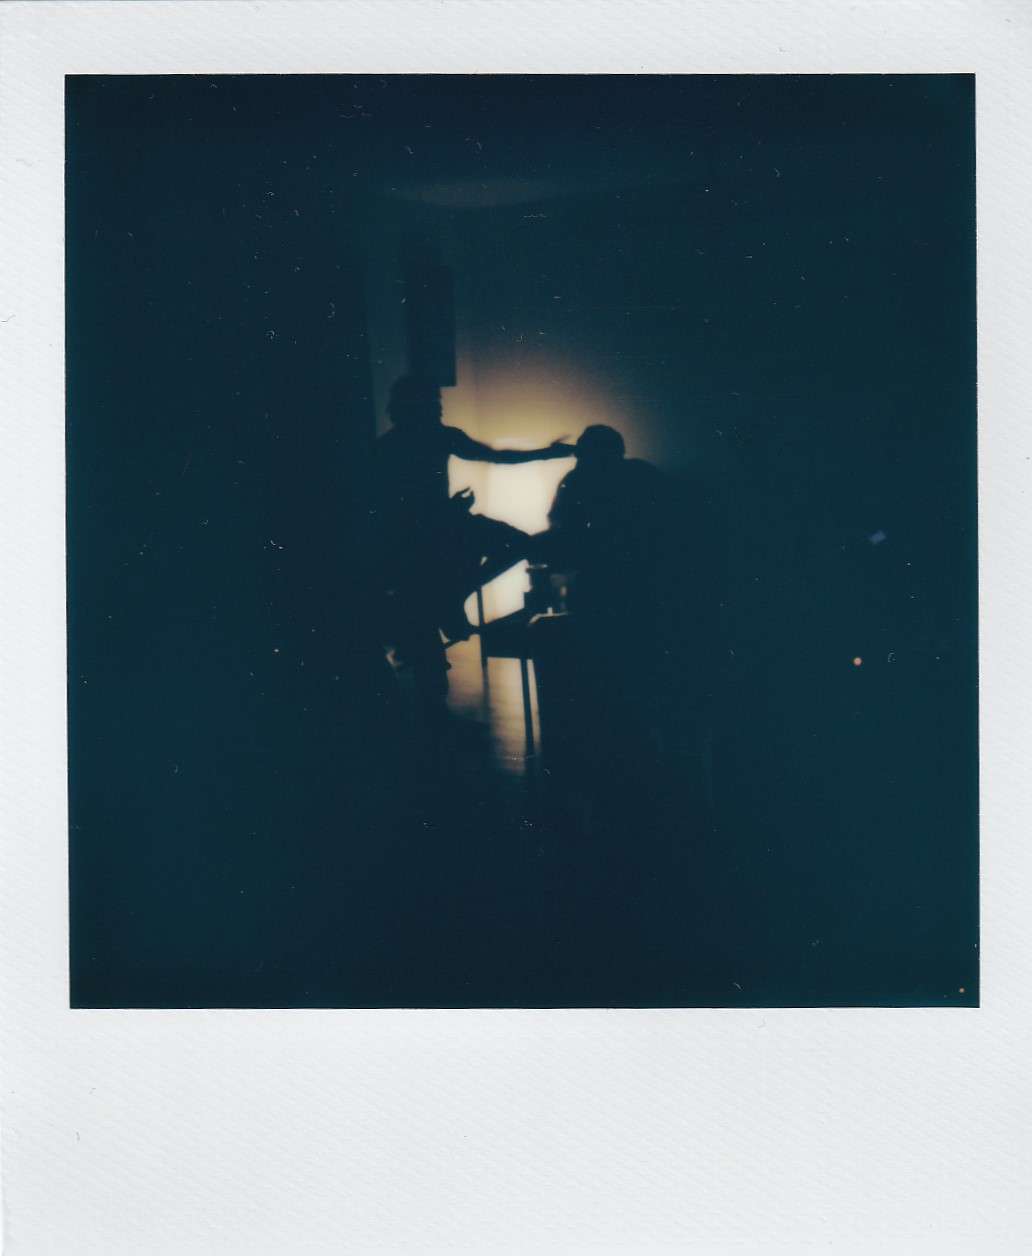 Polaroid photography by I'Nasah Crockett, silhouette with their arm outstretched towards another